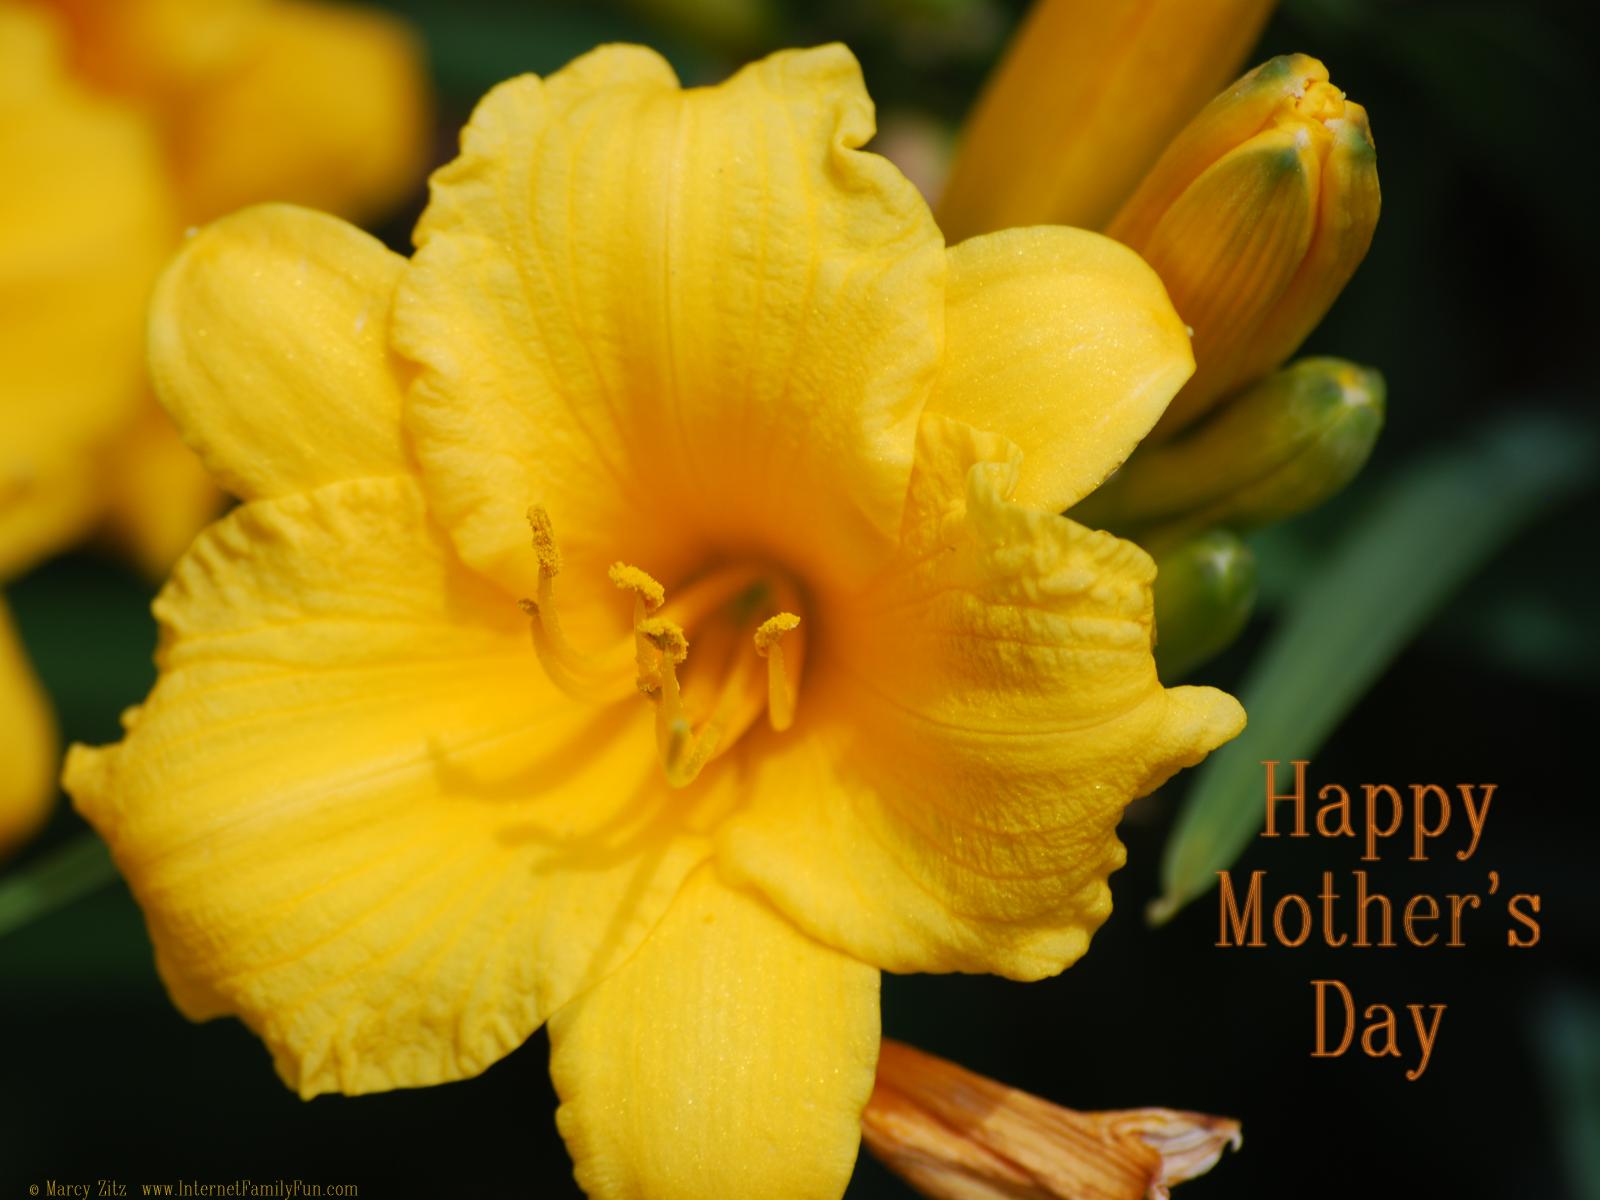 Free Christian Wallpaper: Happy Mothers Day Wishes. Beautiful Flower Wallpaper